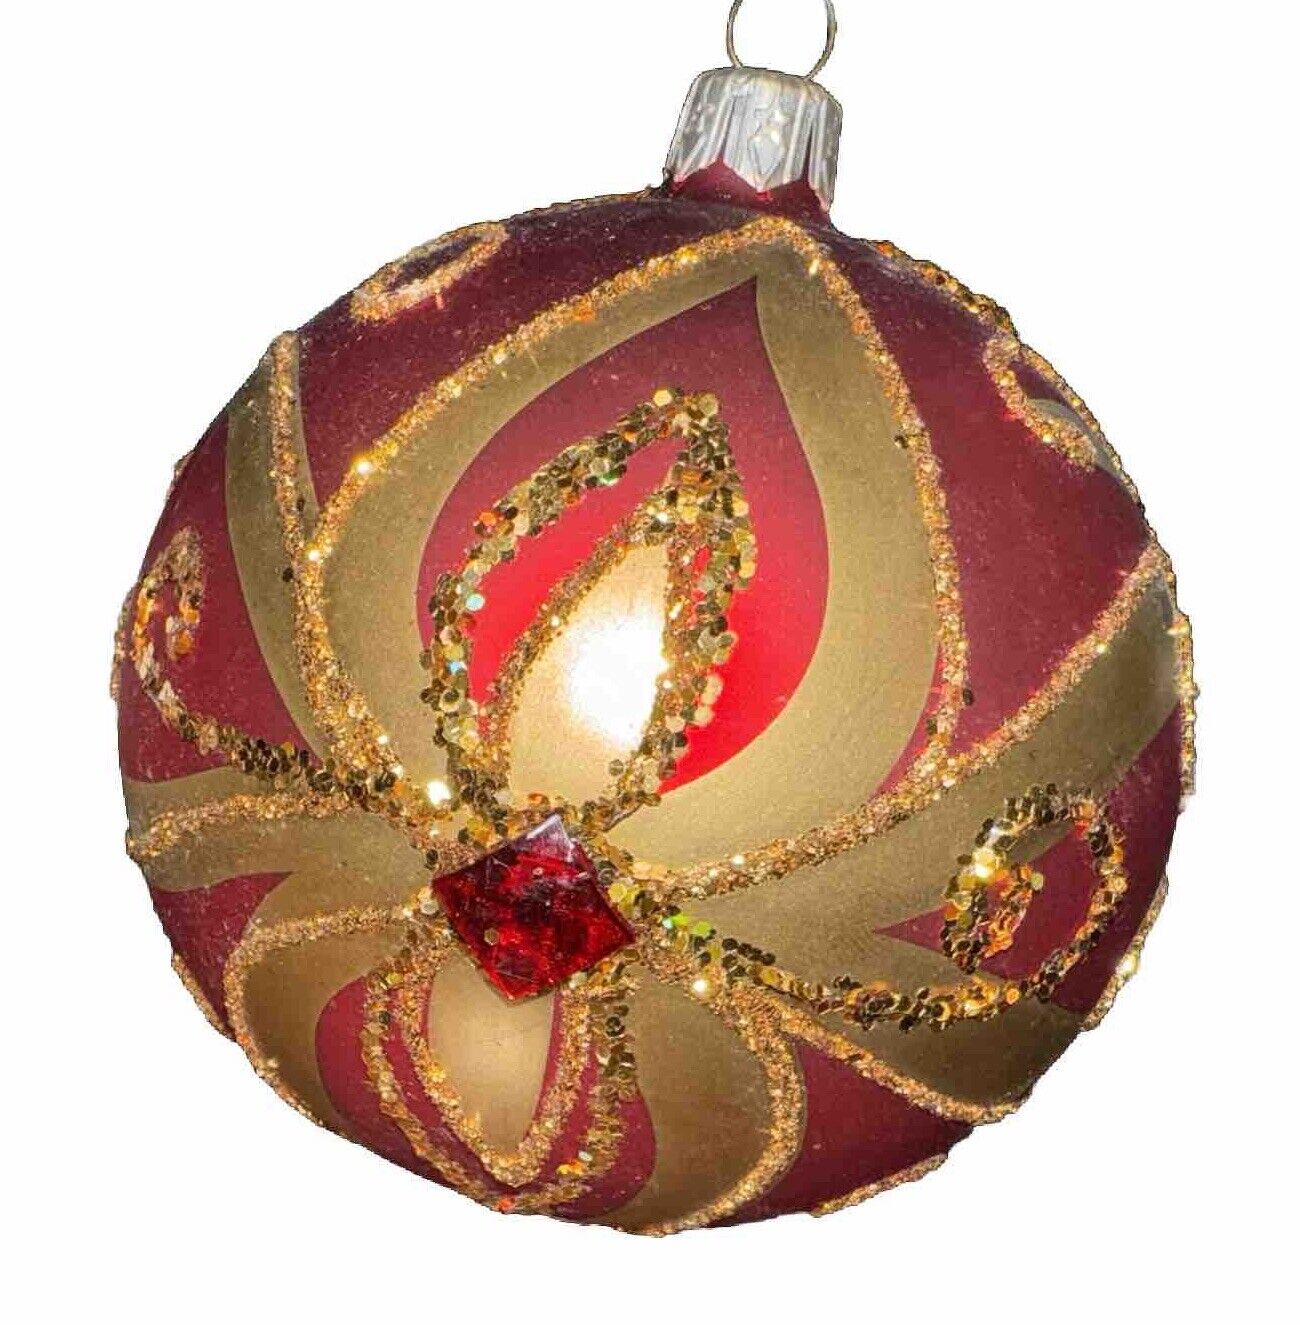 Vintage Large Hand Blown Glass Ornament Glittered Red Gold Designs